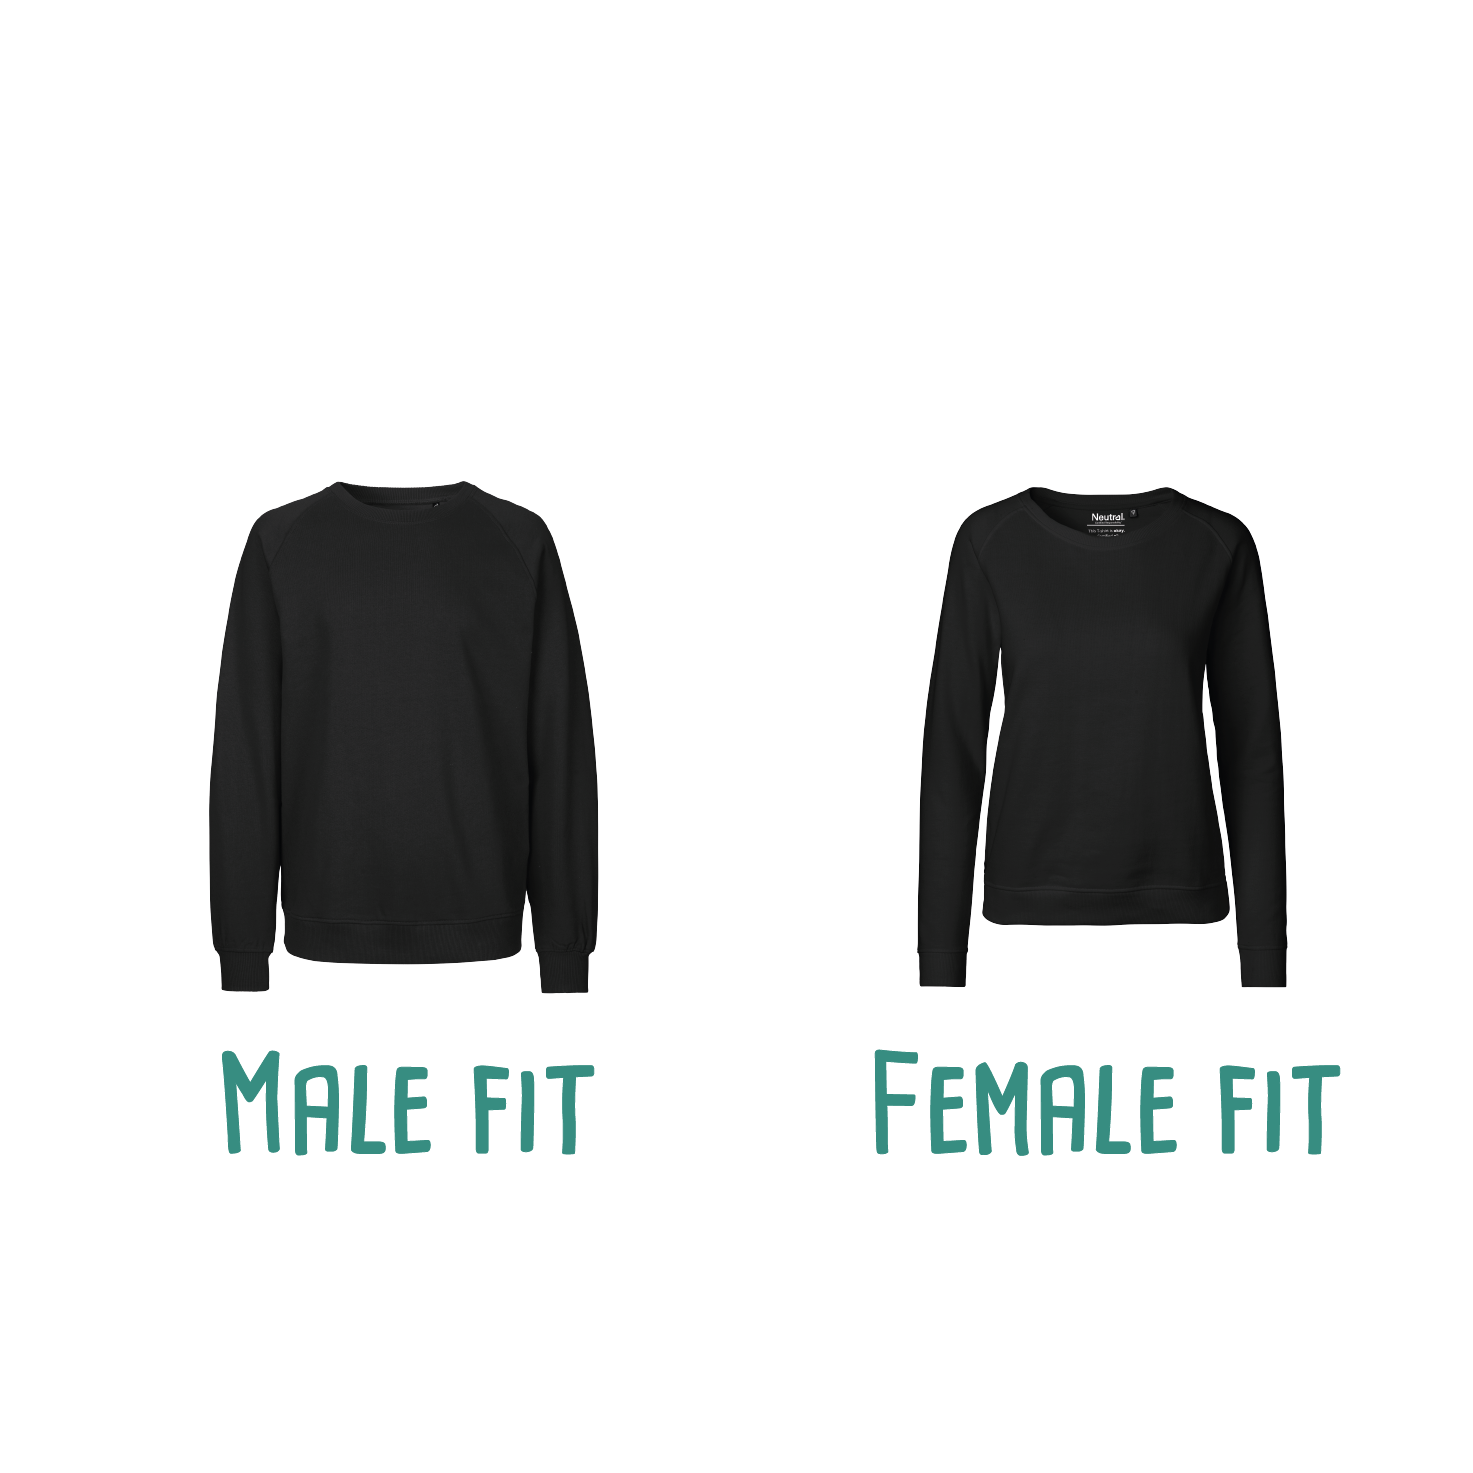 Difference between male or female fit of adult sweaters by KMLeon.